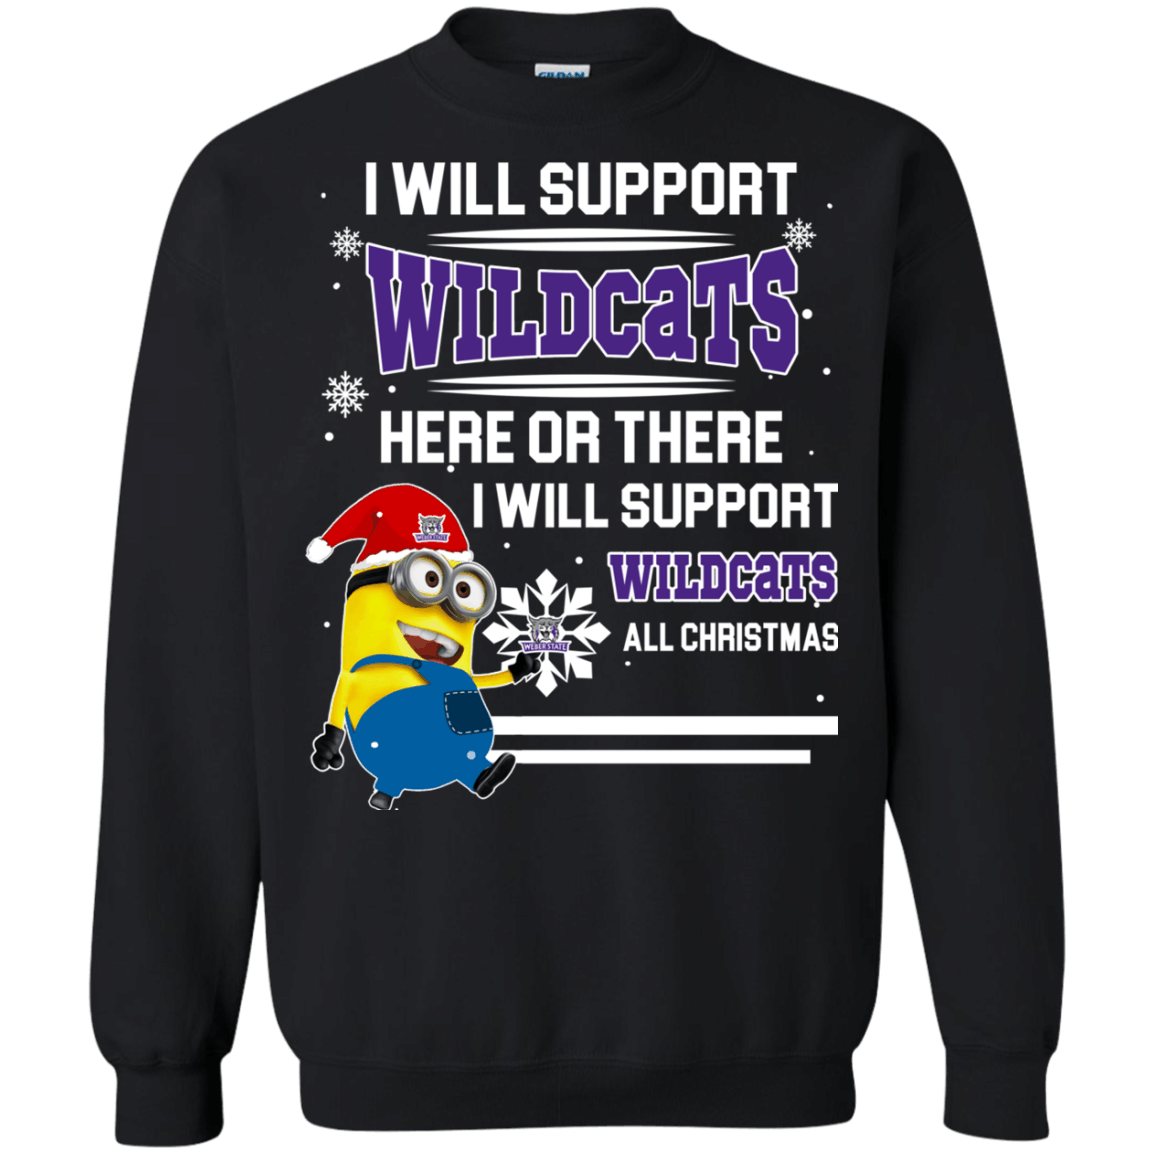 Amazing shirt Weber State Wildcats Minion Ugly Christmas Sweaters Support Here Or There All Christmas Sweatshirts